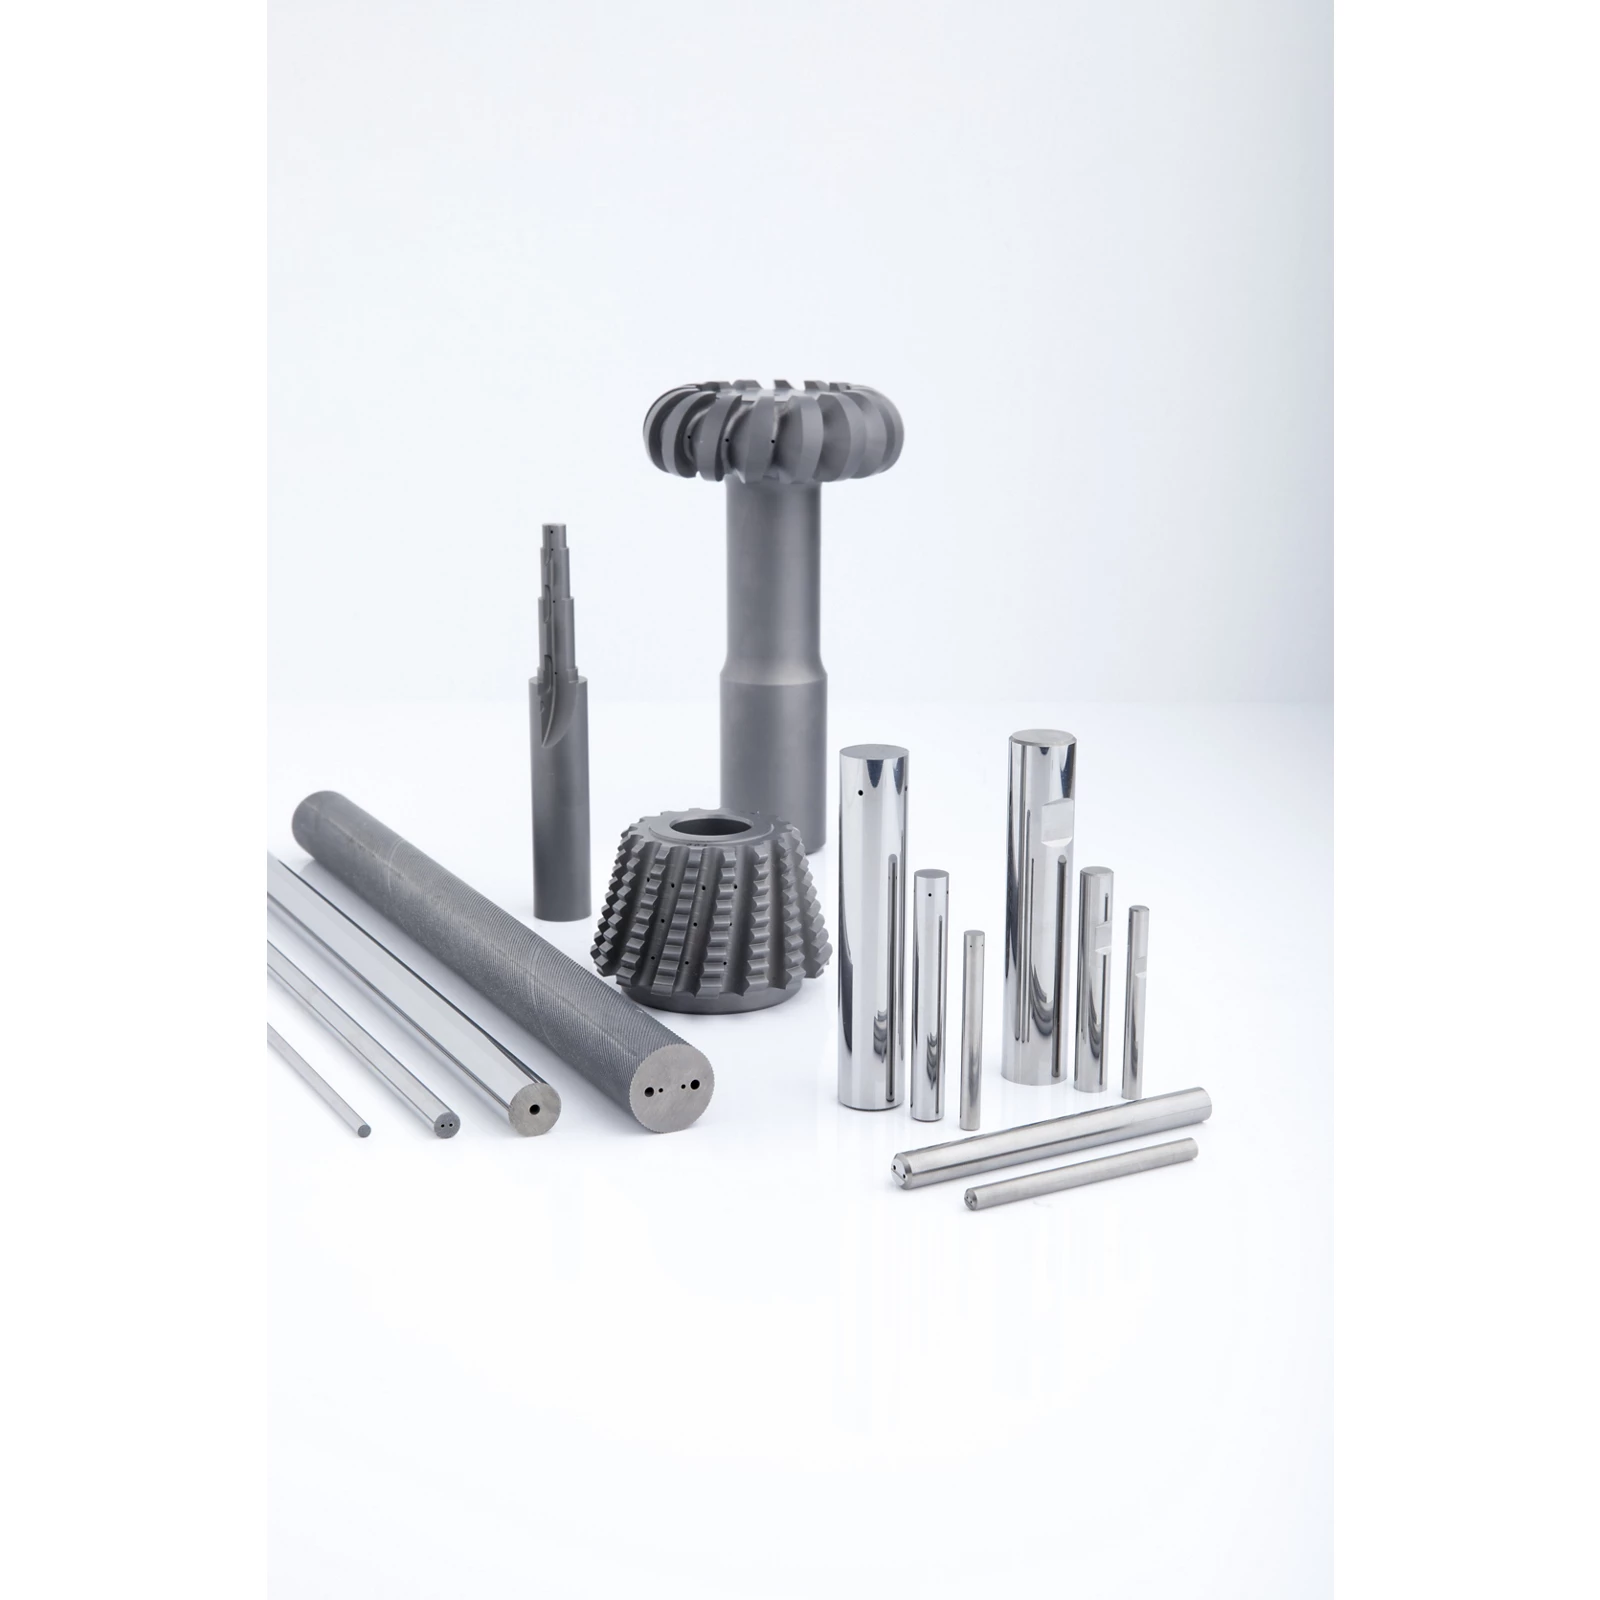 Rods & Preforms for metal cutting